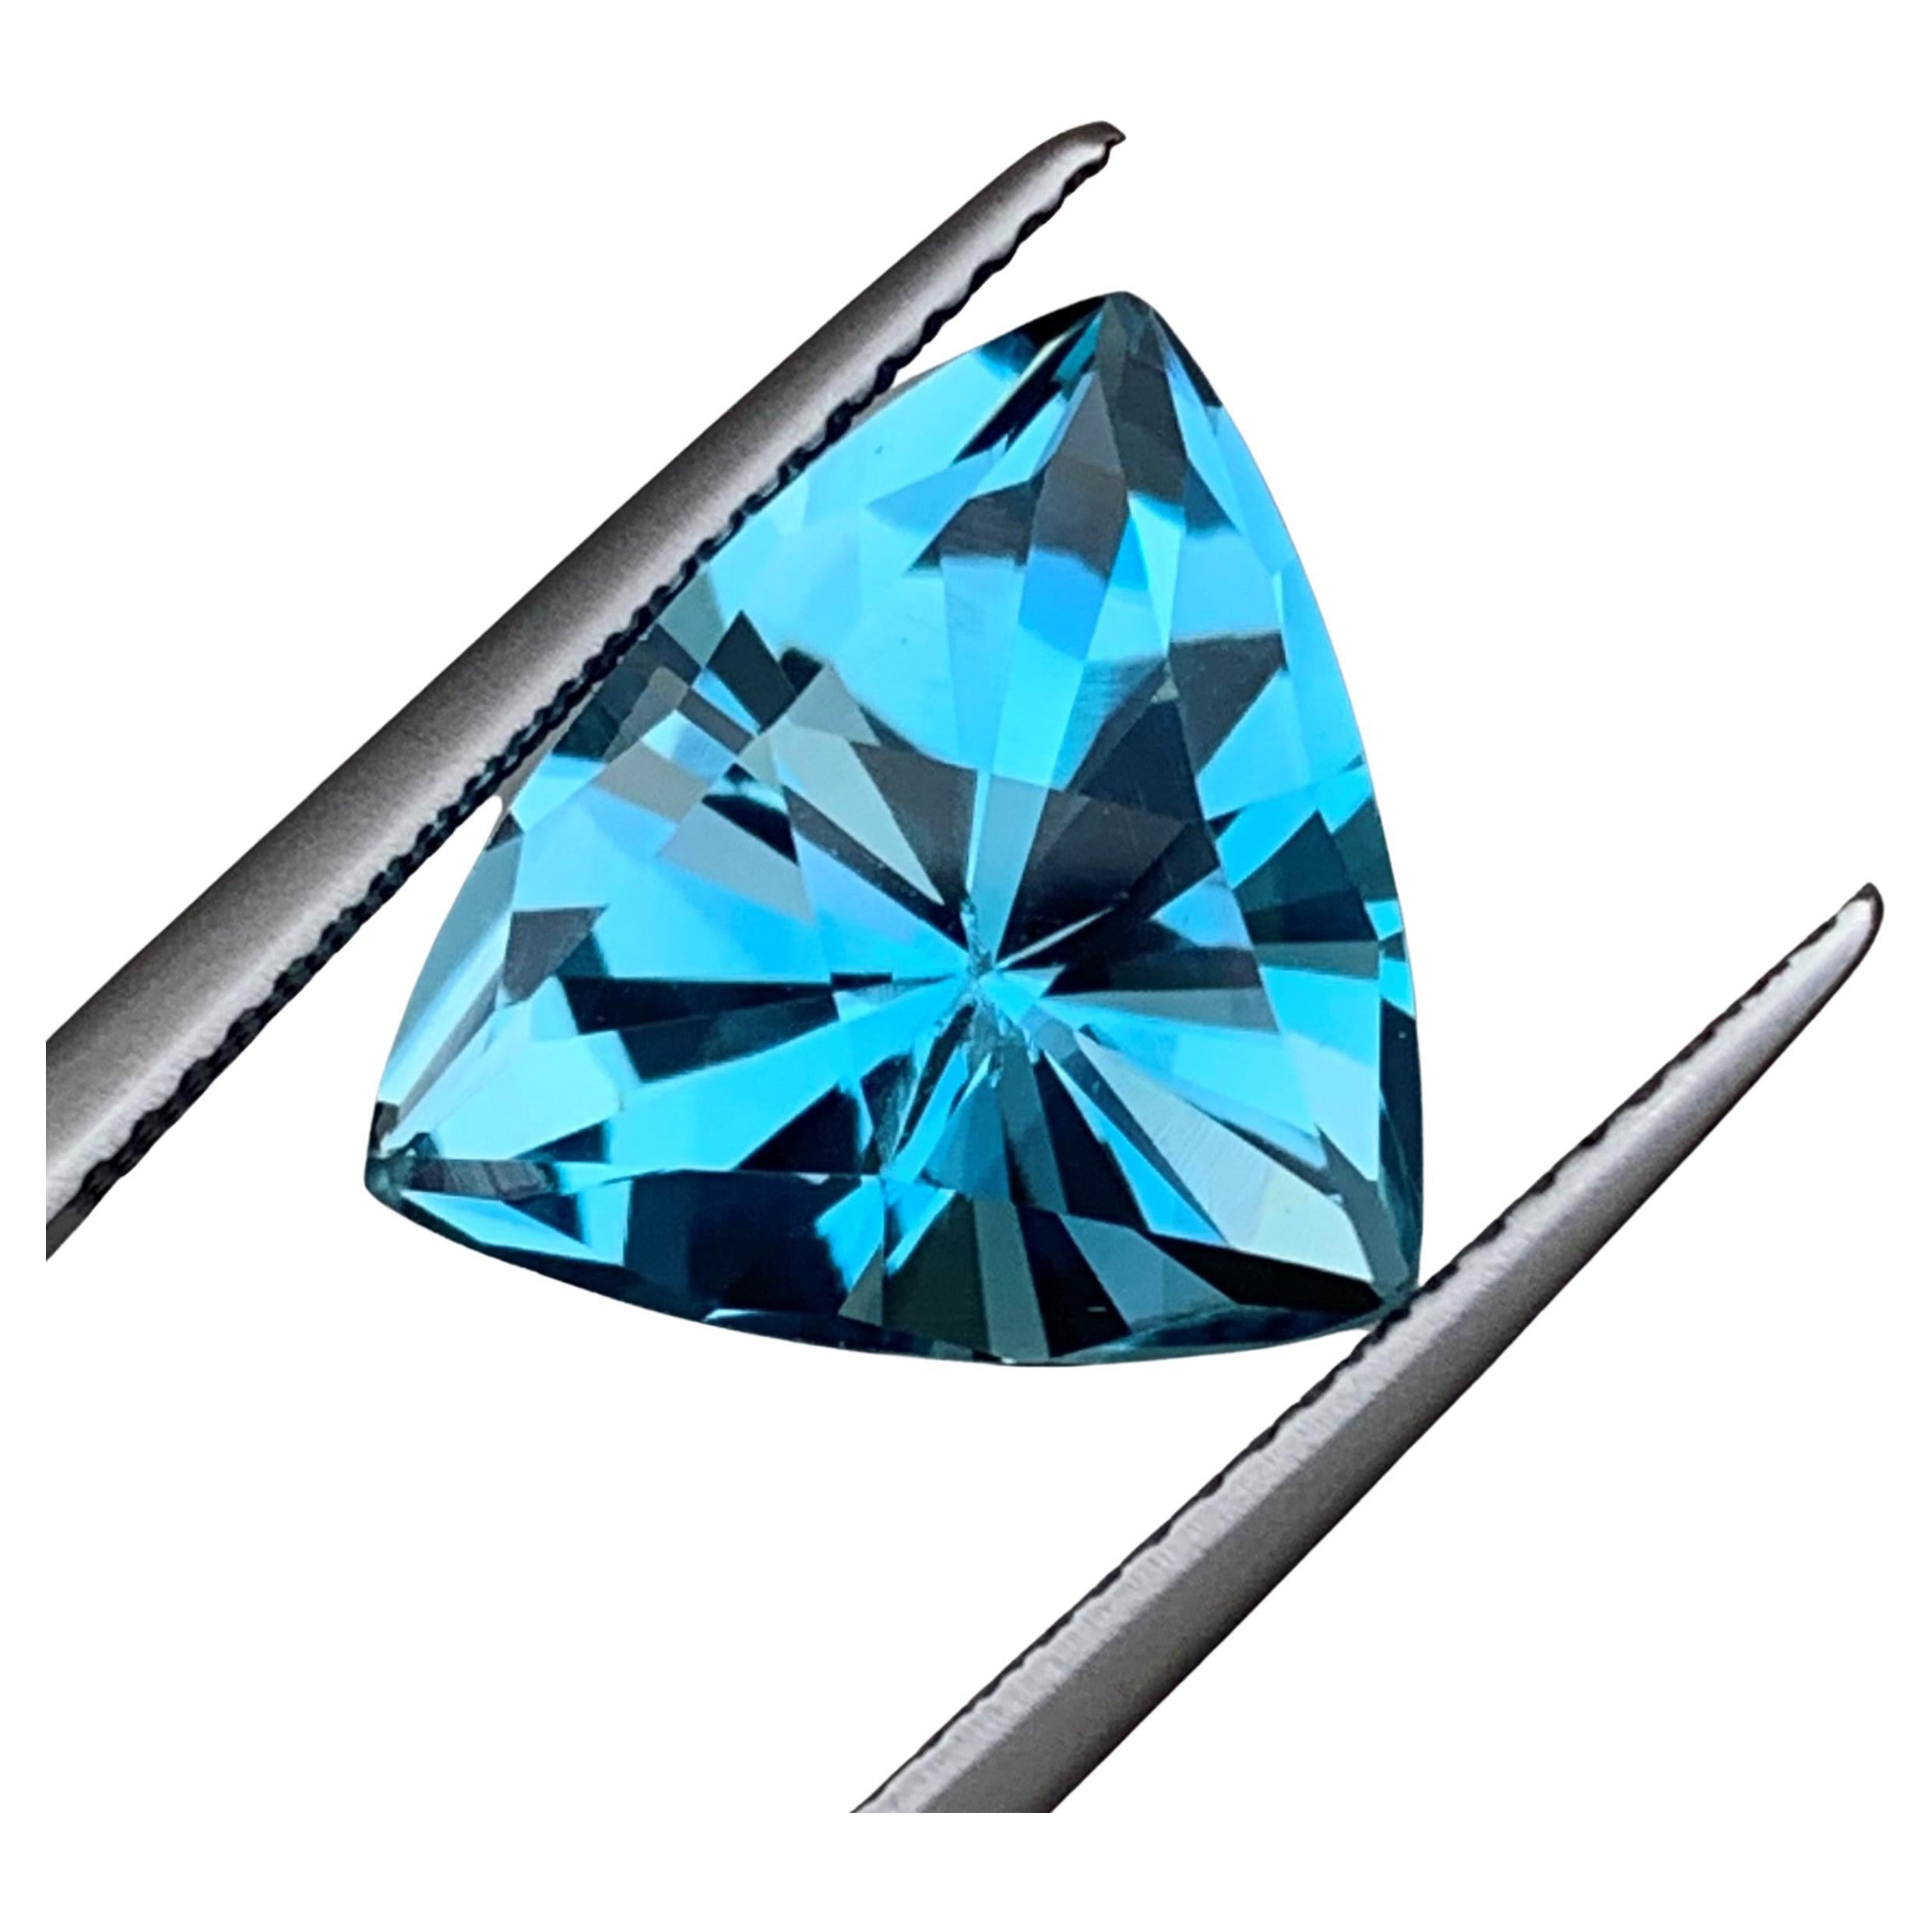 Genuine 9.0 Carat Trillion Cut Loose Blue Topaz from Brazil Available for Sell